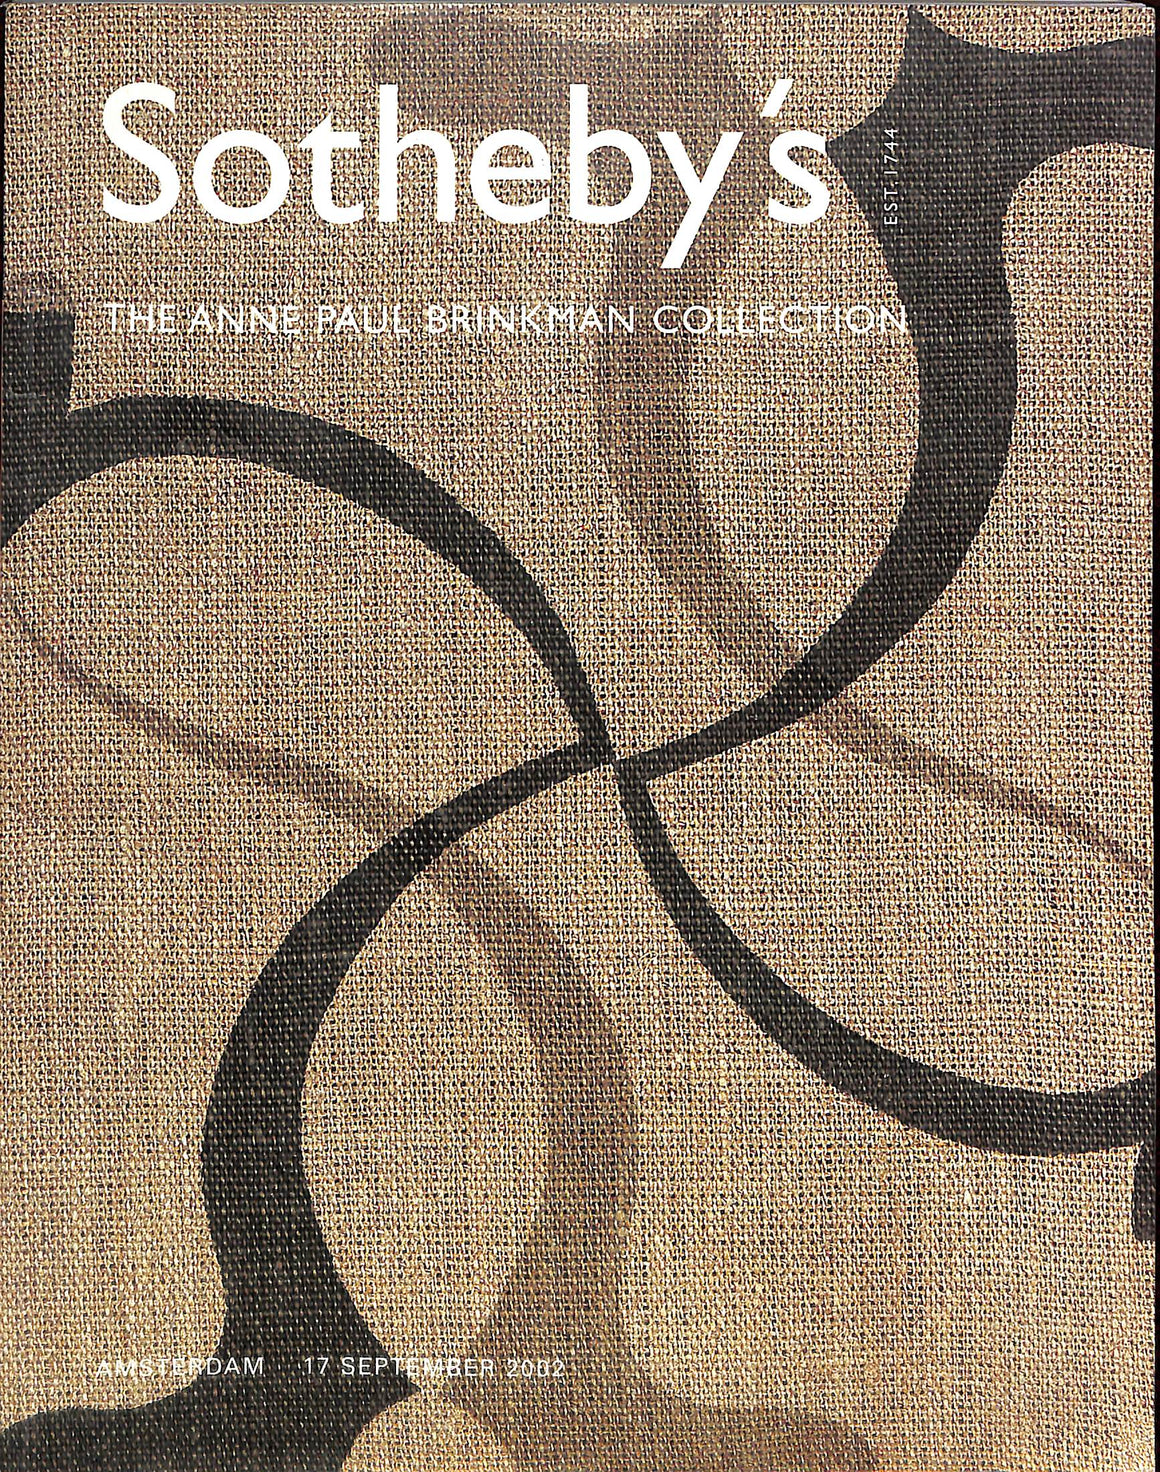 "The Anne Paul Brinkman Collection" 17 September 2002 Sotheby's